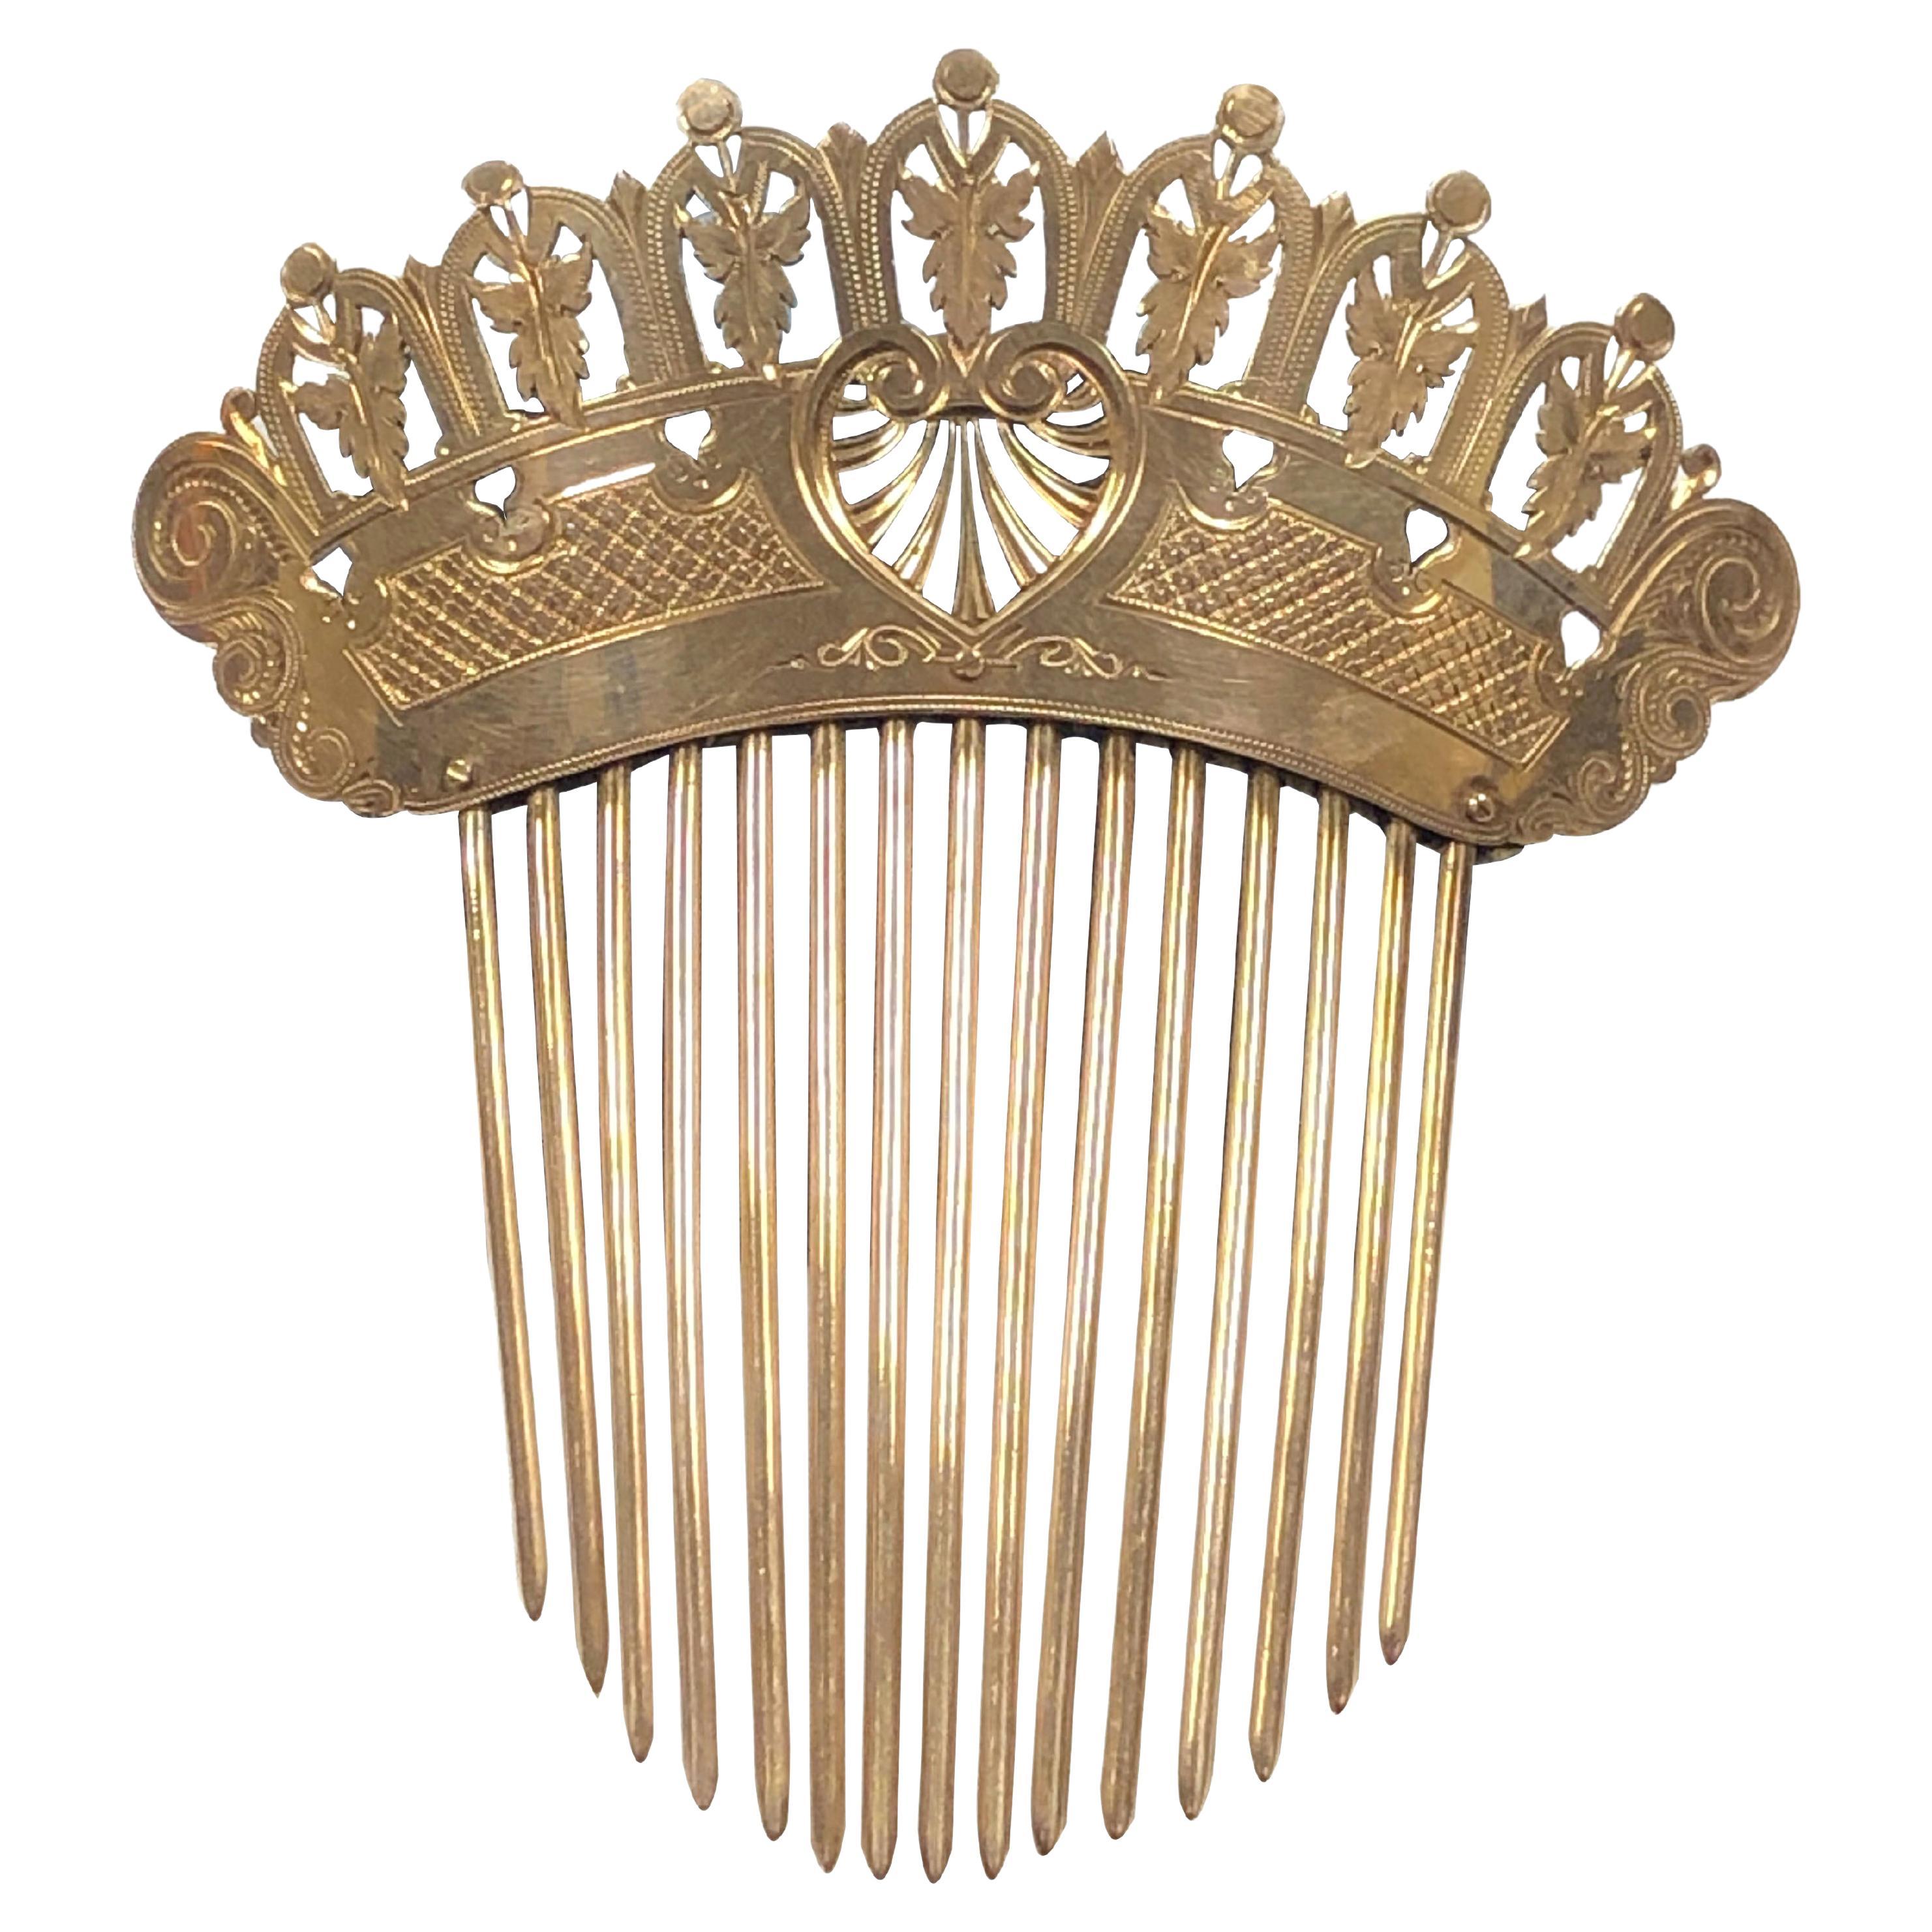 Antique Hair Comb - 25 For Sale on 1stDibs